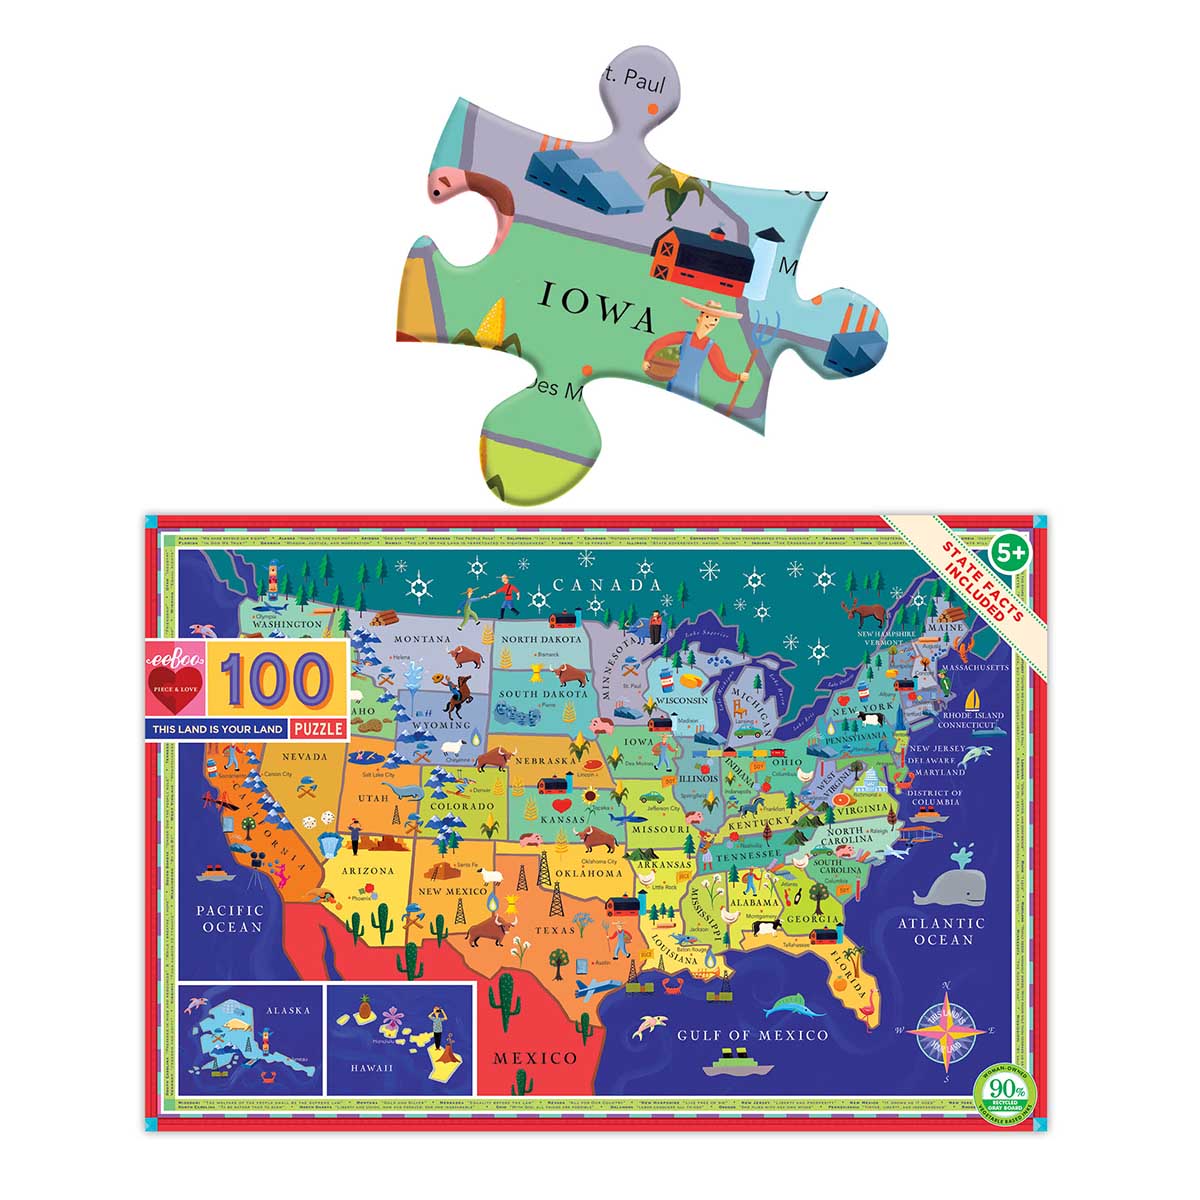 This Land is Your Land Maps & Geography Jigsaw Puzzle